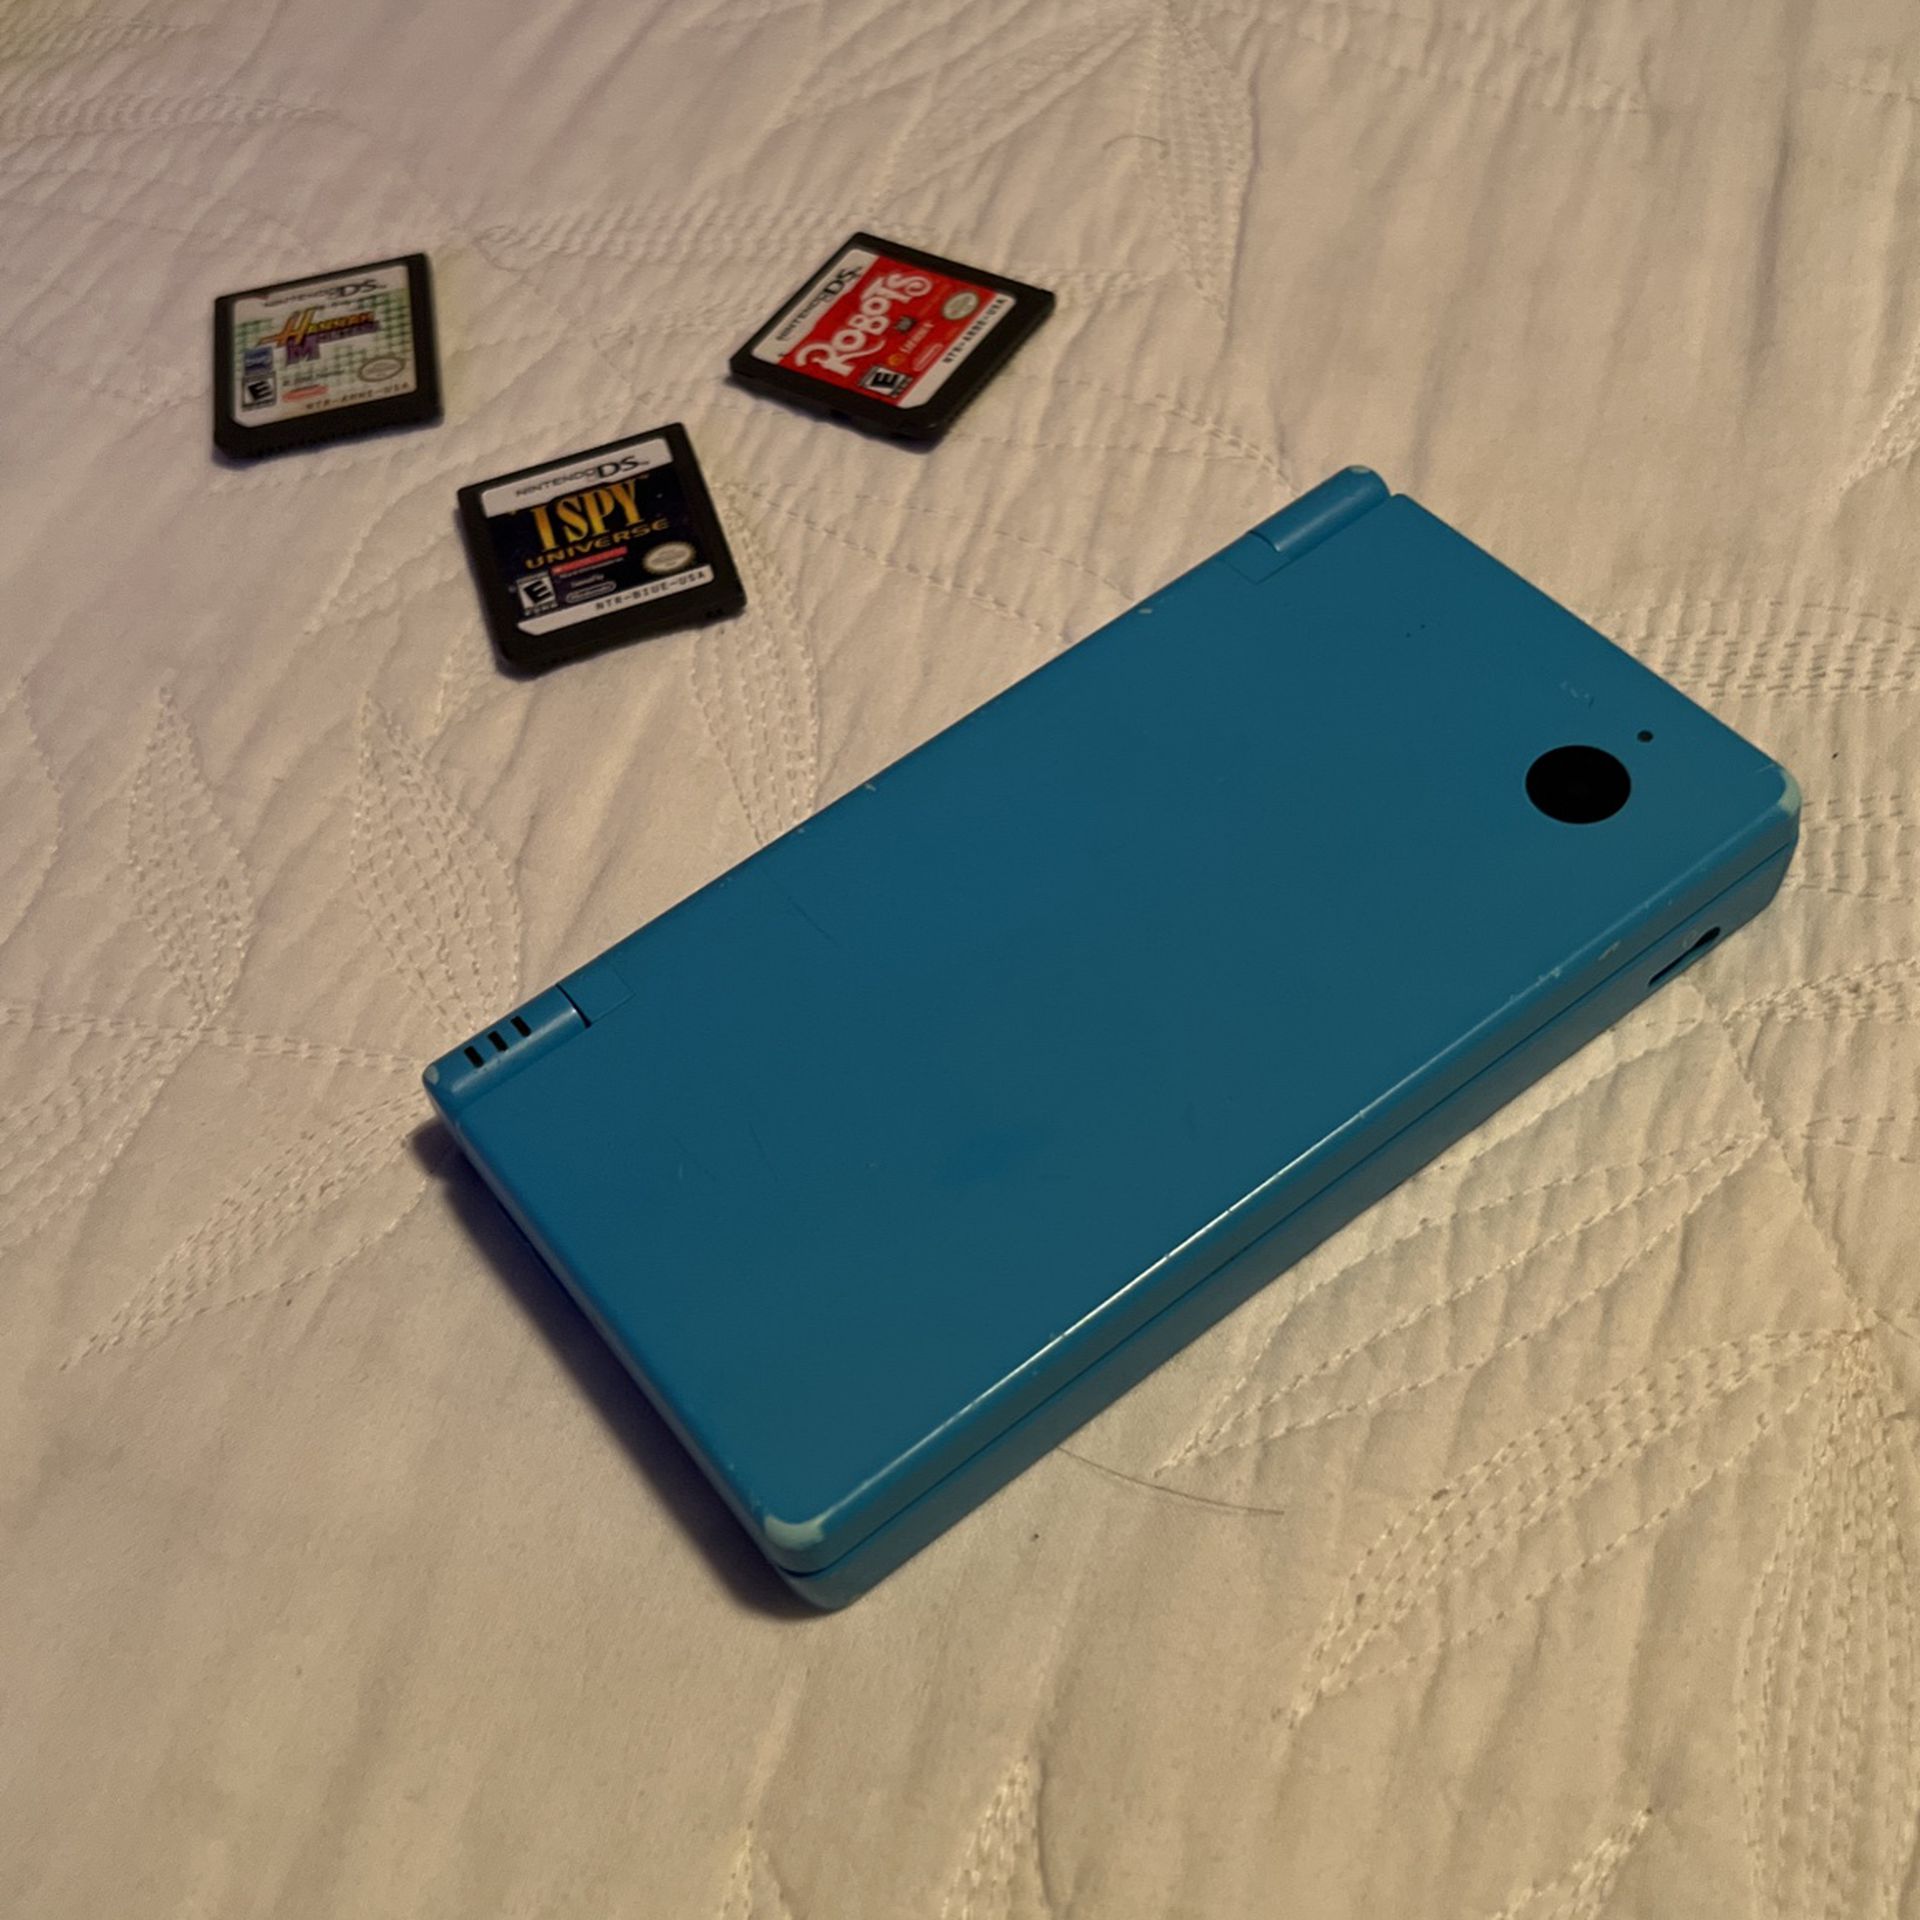 Nintendo DS With Games 